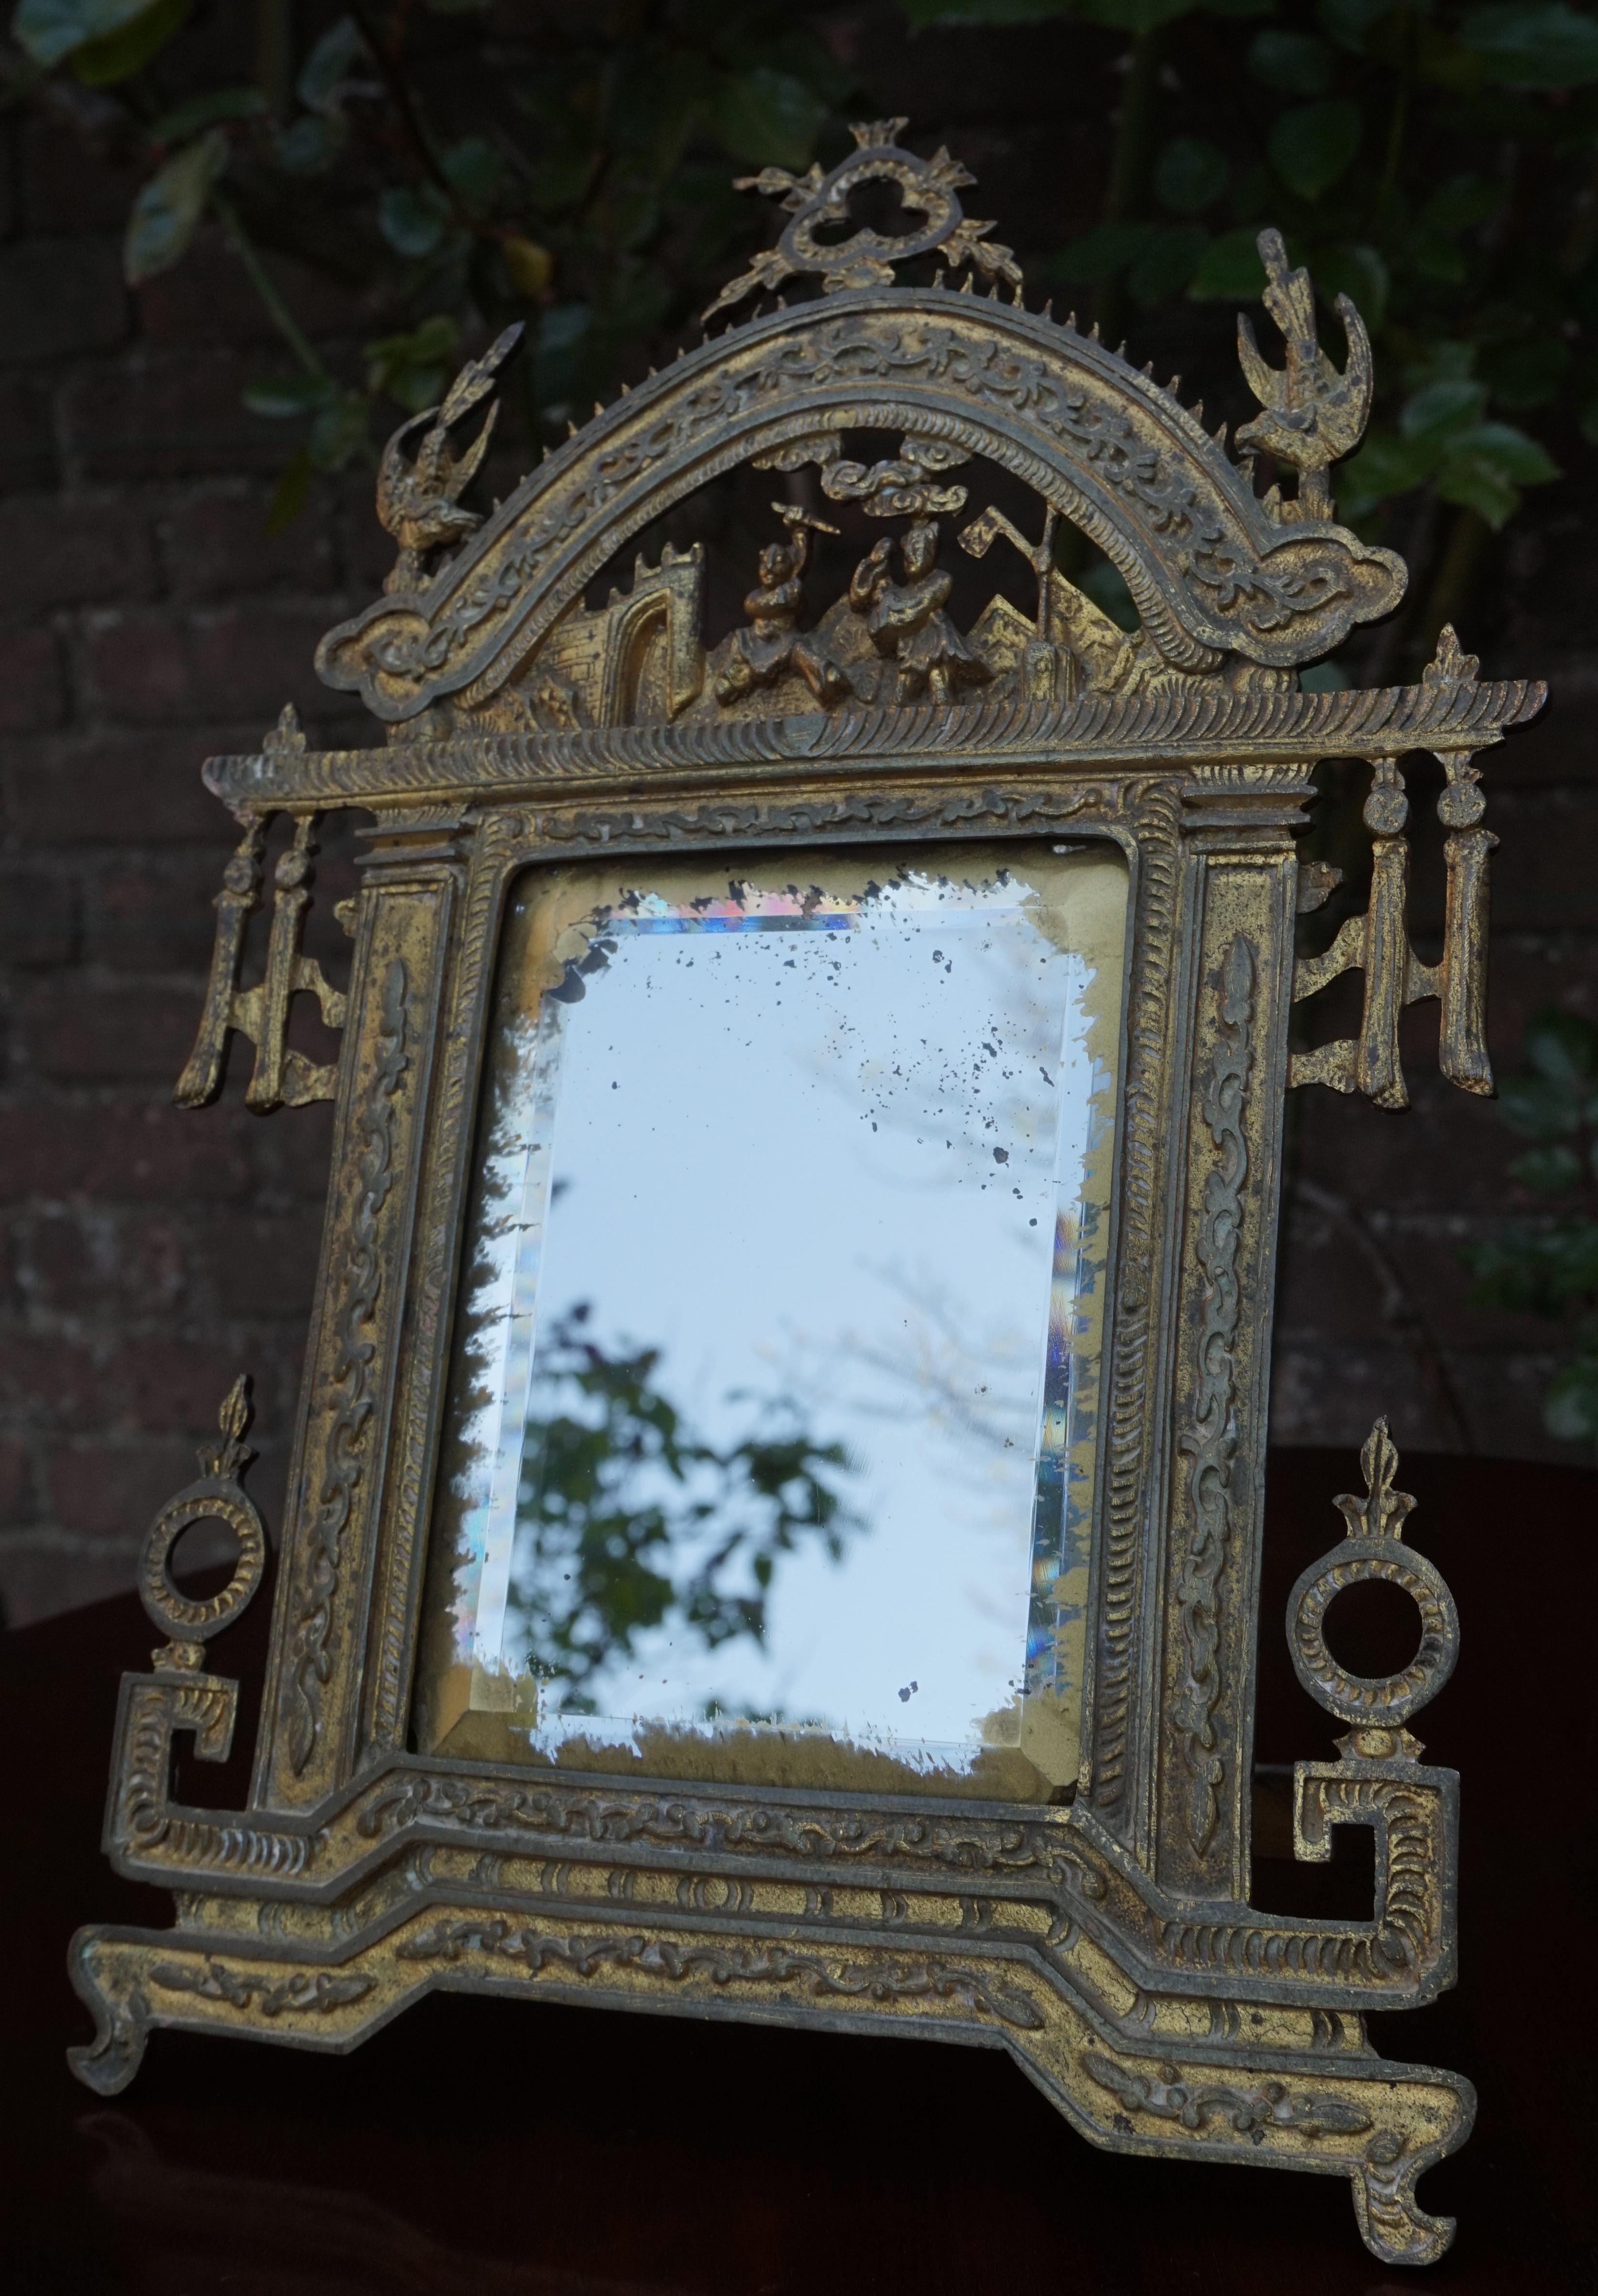 Late 19th or Early 20th Century Chinese or Chinoiserie Gilt Ormolu Table Mirror For Sale 3